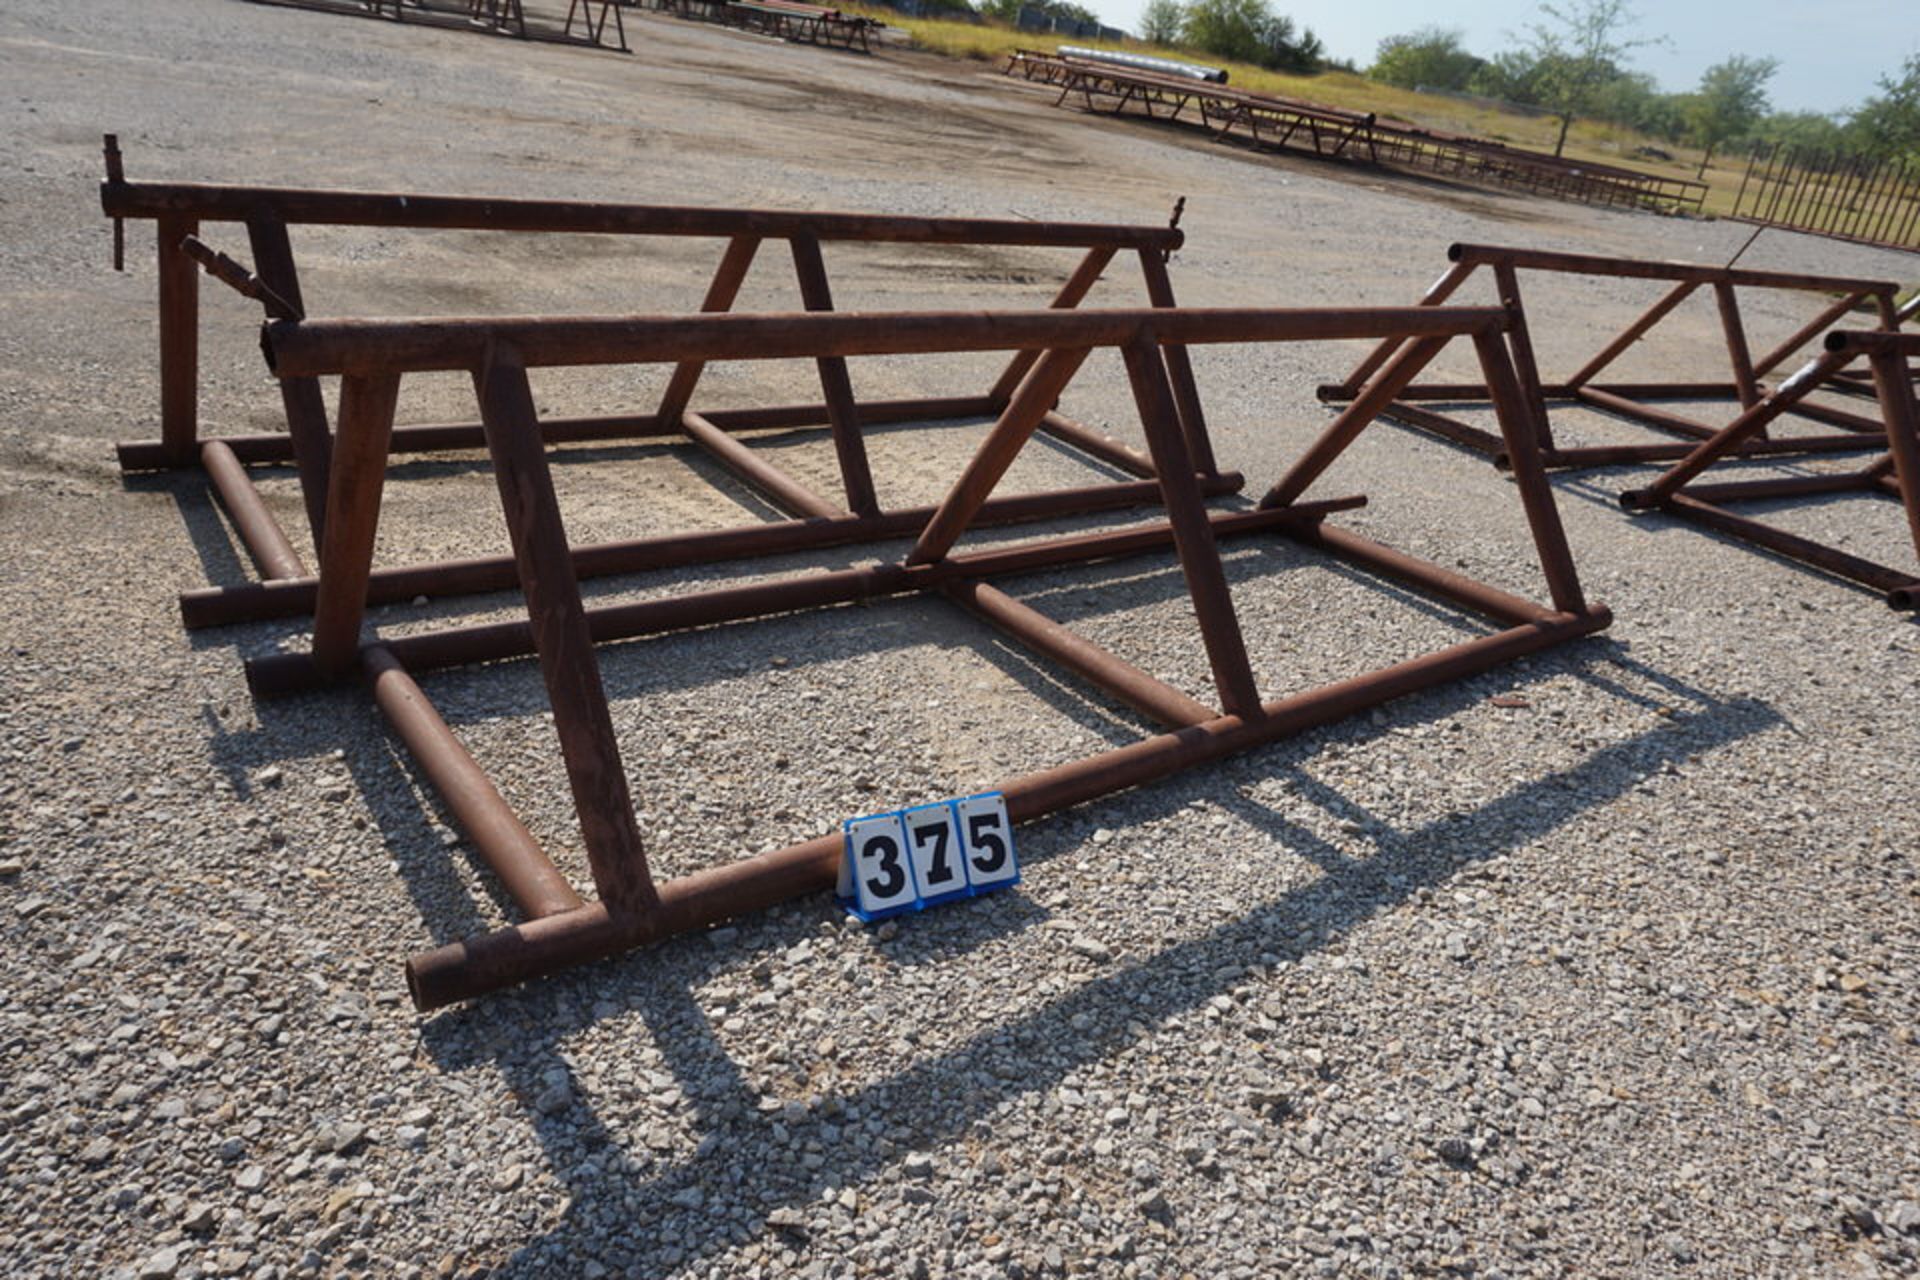 PIPE RACK APPROX 12' LG